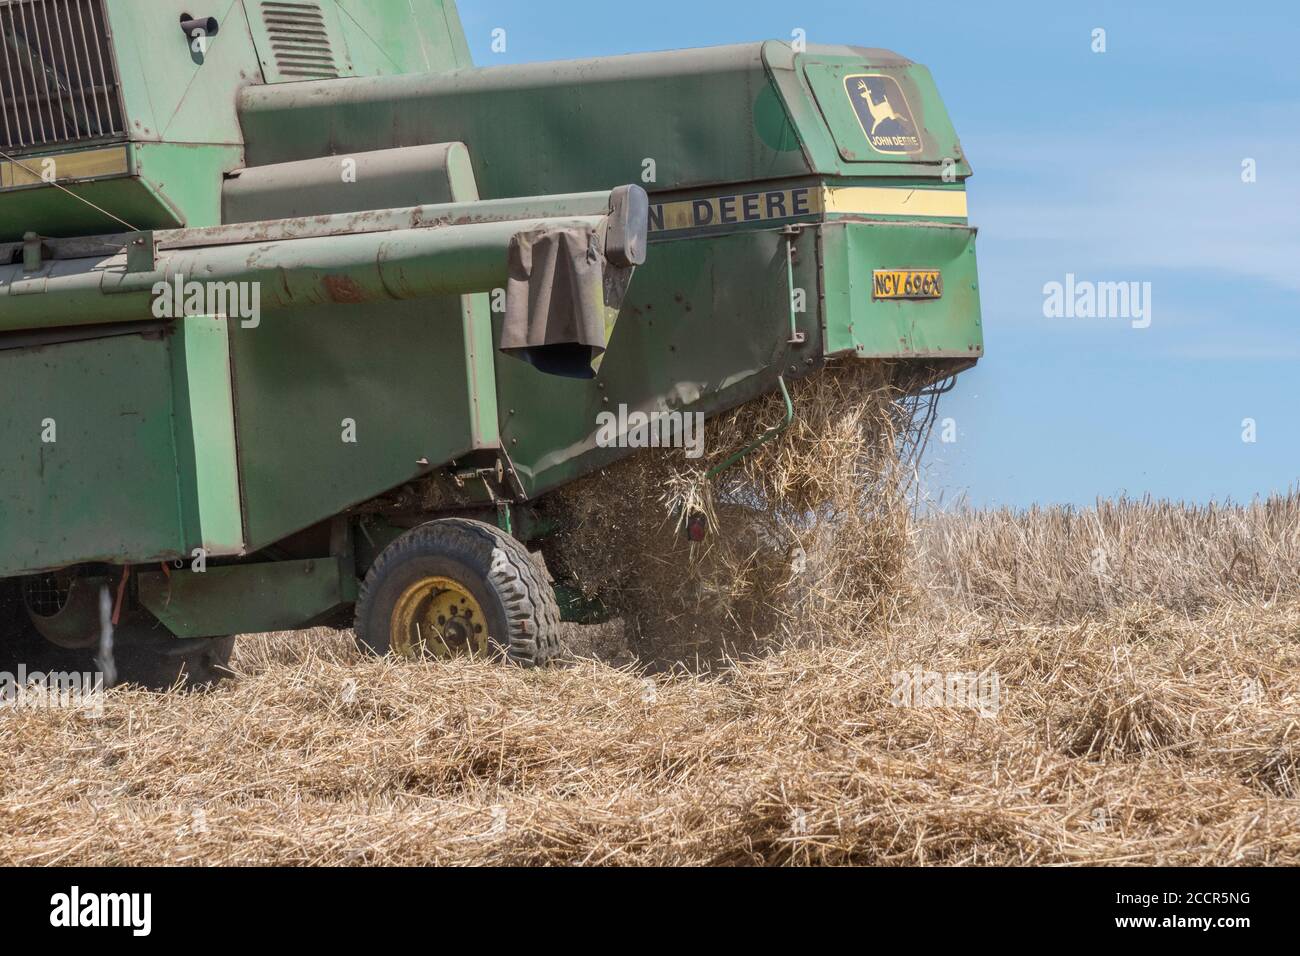 Back end of John Deere combine harvester cutting wheat crop. Grain tank, side pipe, & straw walker visible. For 2020 UK wheat harvest. Stock Photo